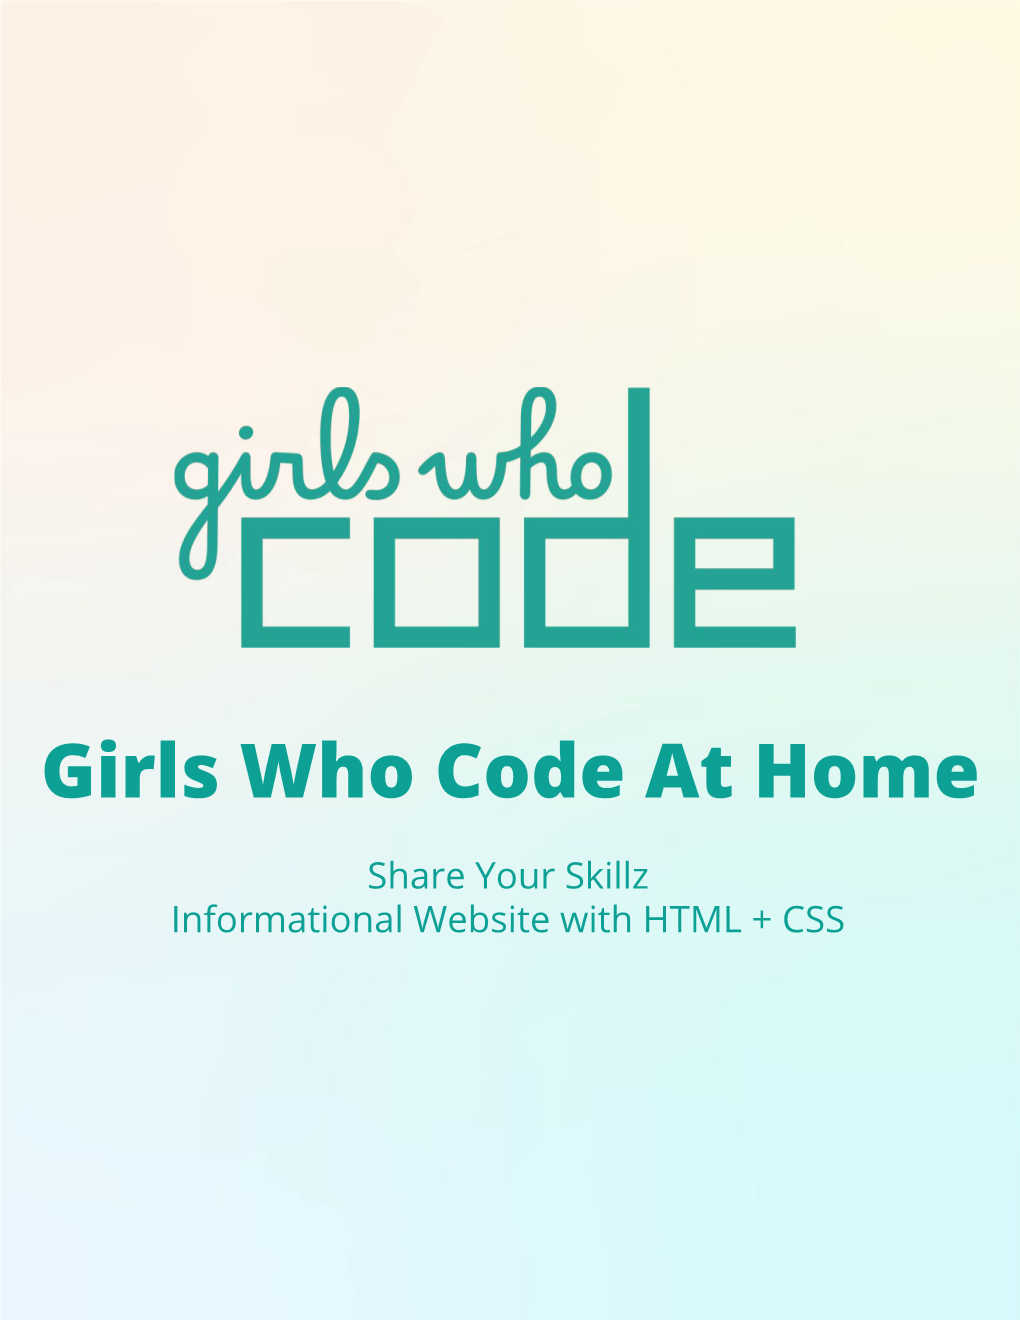 Share Your Skillz Informational Website with HTML + CSS Activity Overview